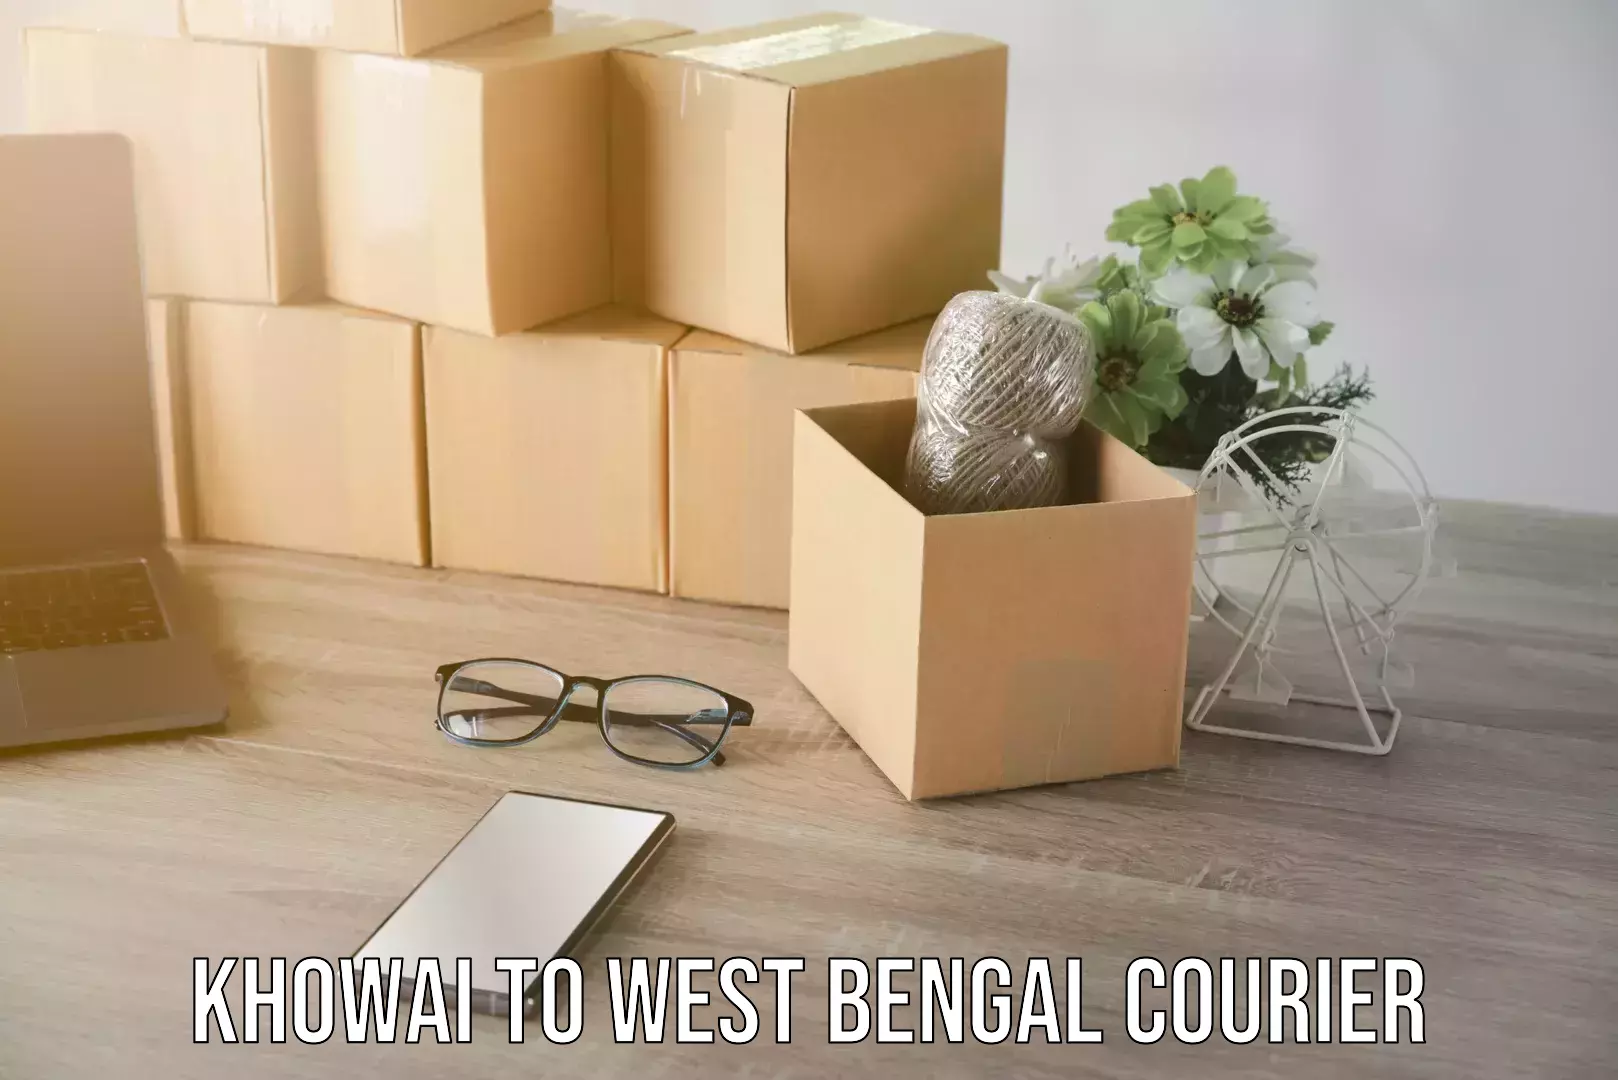 Doorstep delivery service Khowai to West Bengal